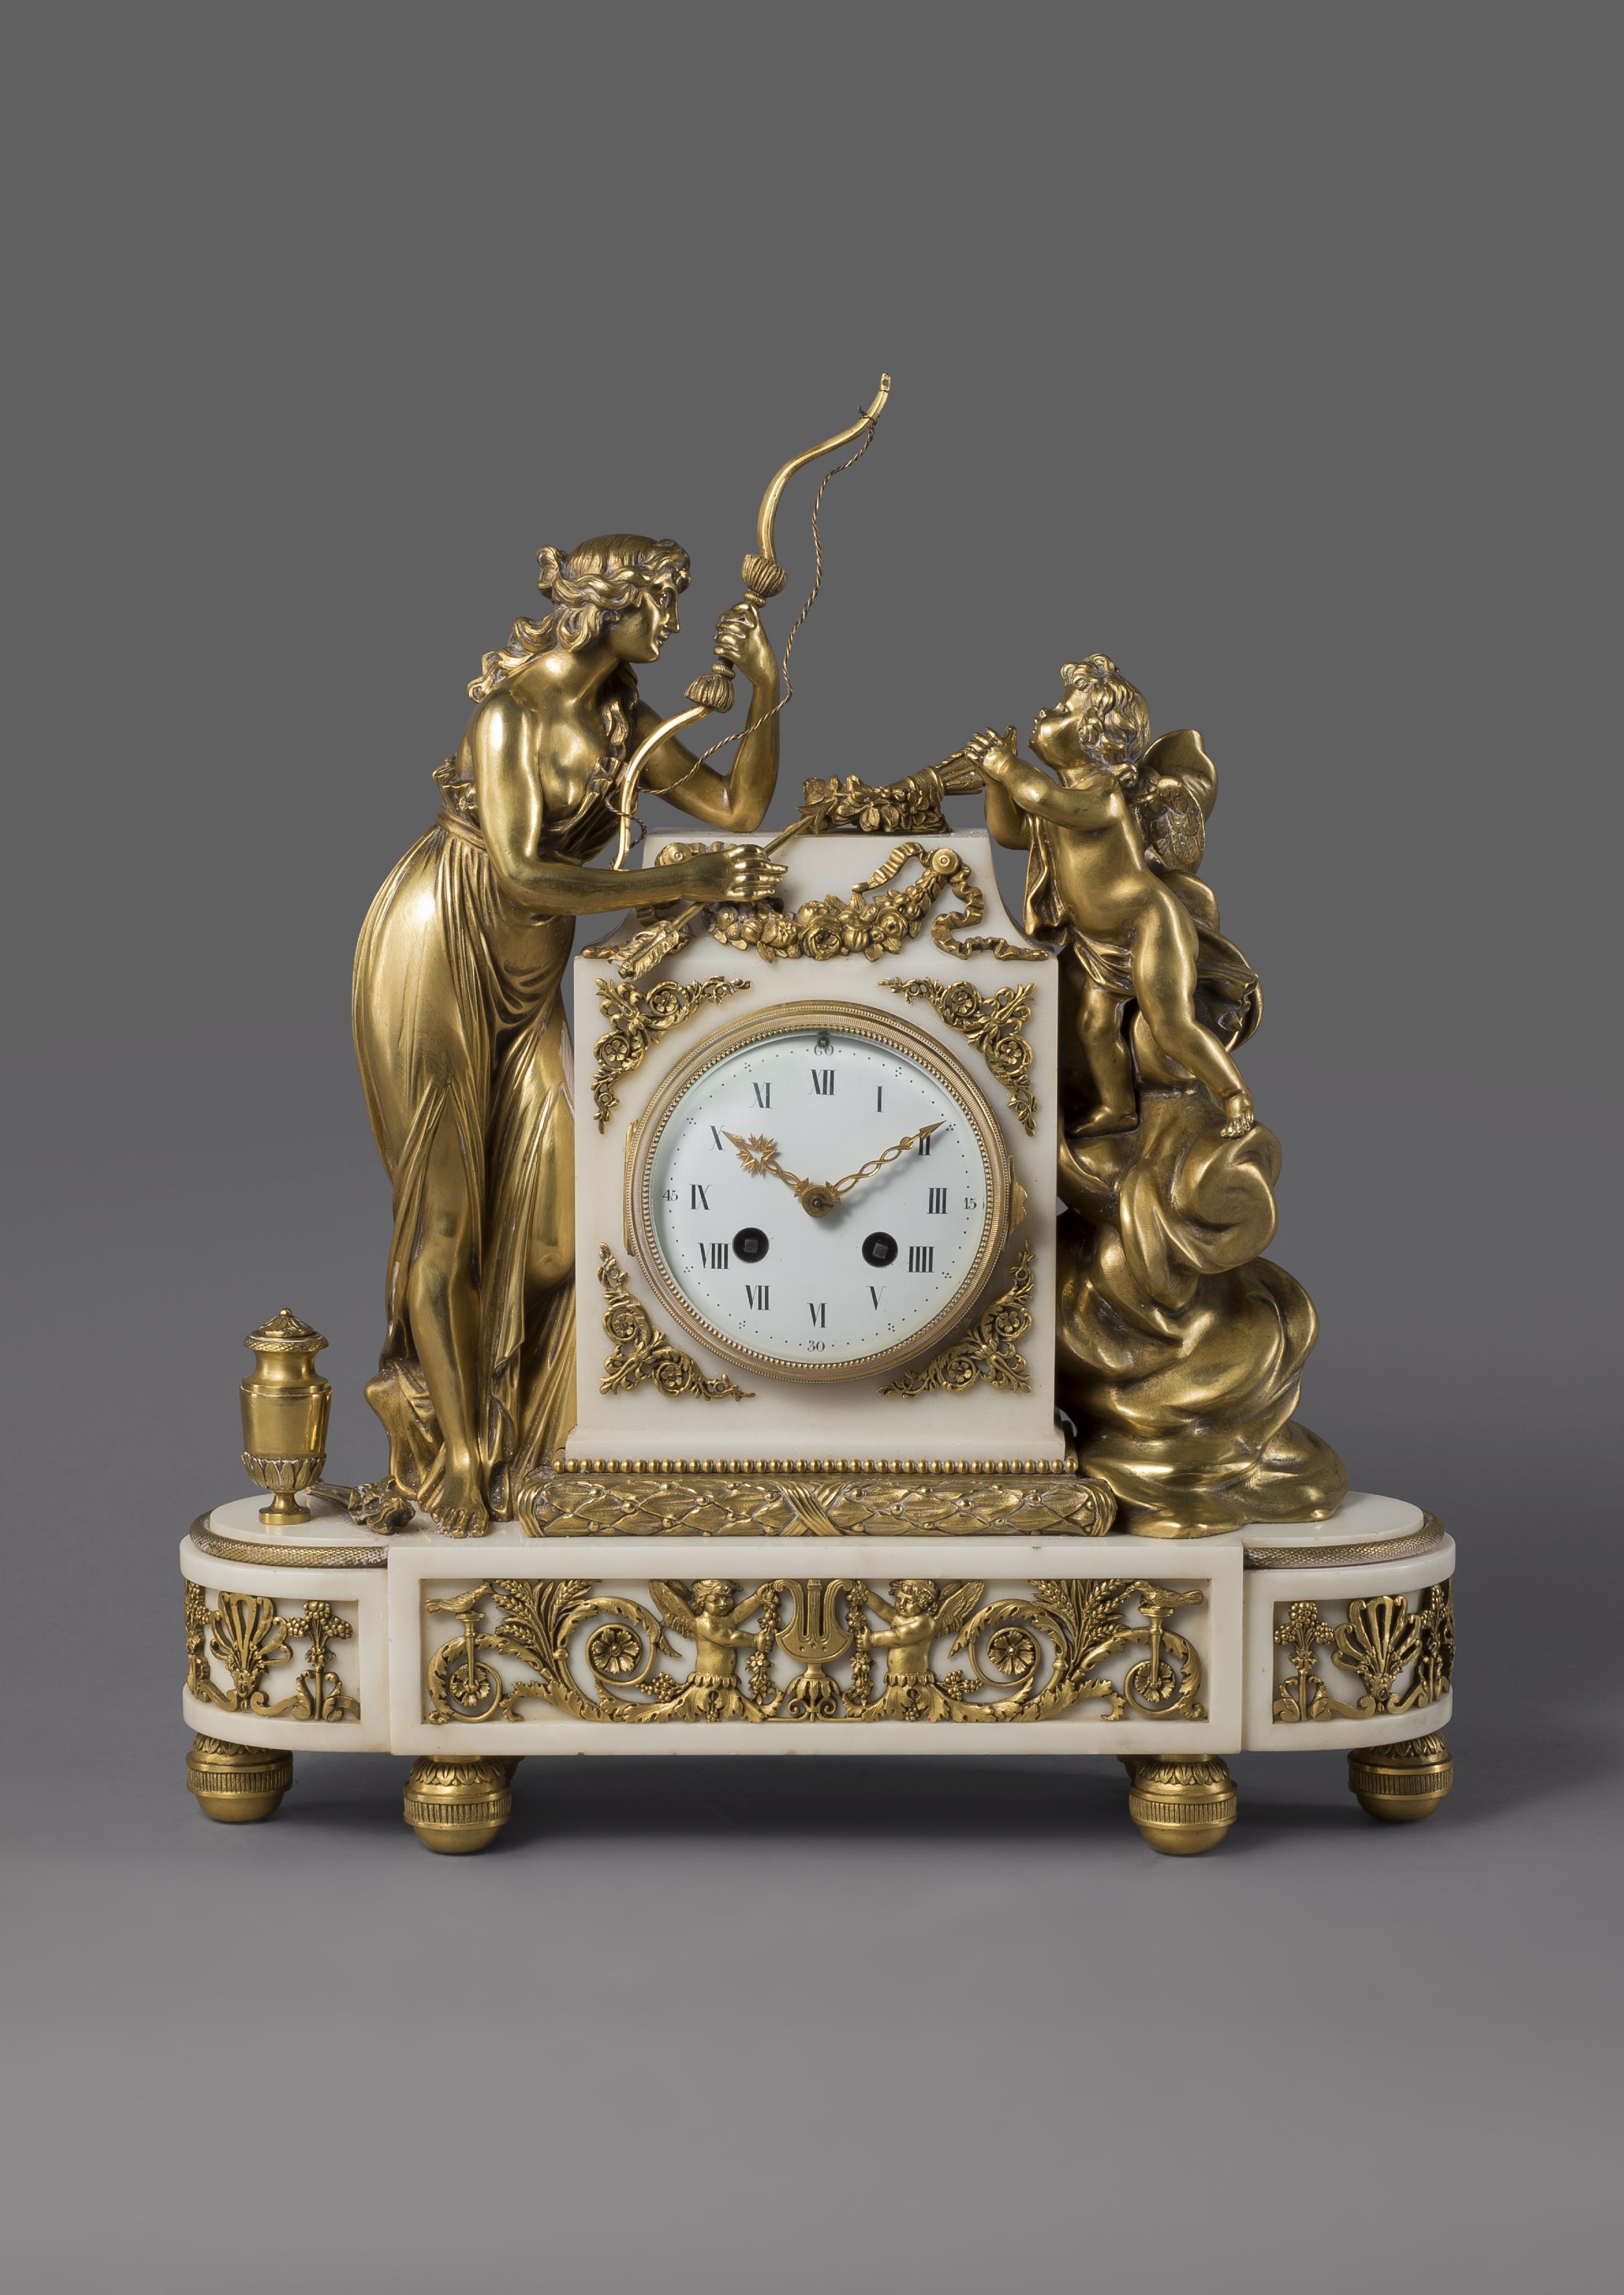 A fine Louis XVI style gilt bronze and white marble clock depicting Diana and Cupid, by François Linke. 

French, circa 1890. 

Signed to the bronze 'Linke'. 

This rare example of a clock by François Linke has a twin train eight-day movement